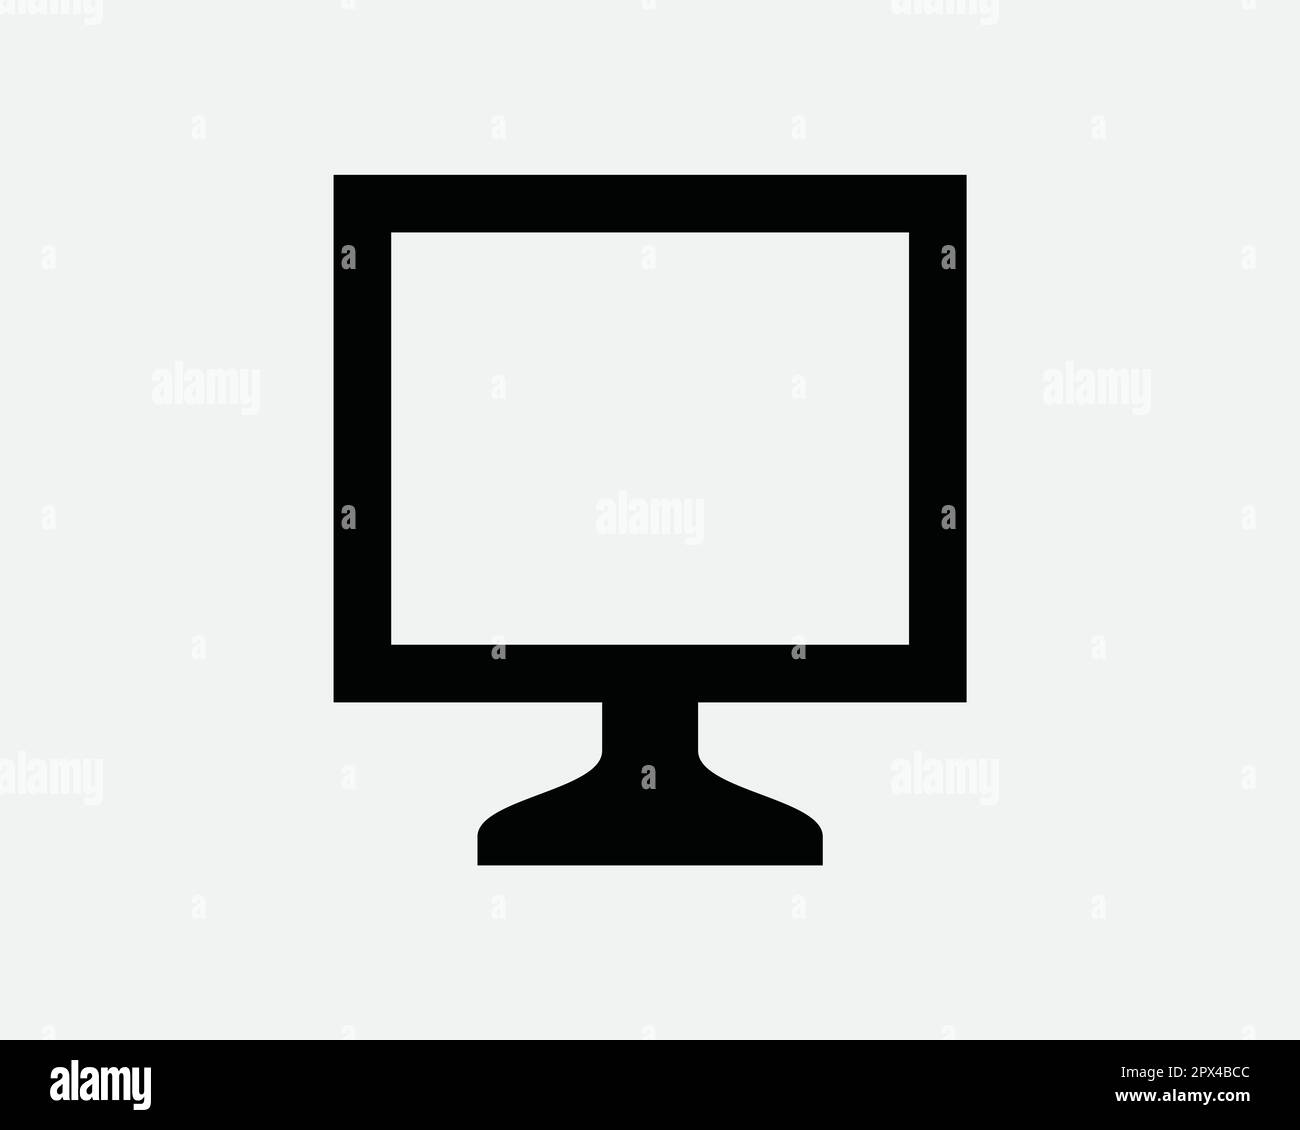 Computer Monitor Screen Icon. PC Desktop Digital Display TV Television LCD LED Square Frame Sign Symbol Artwork Graphic Illustration Clipart Vector Stock Vector